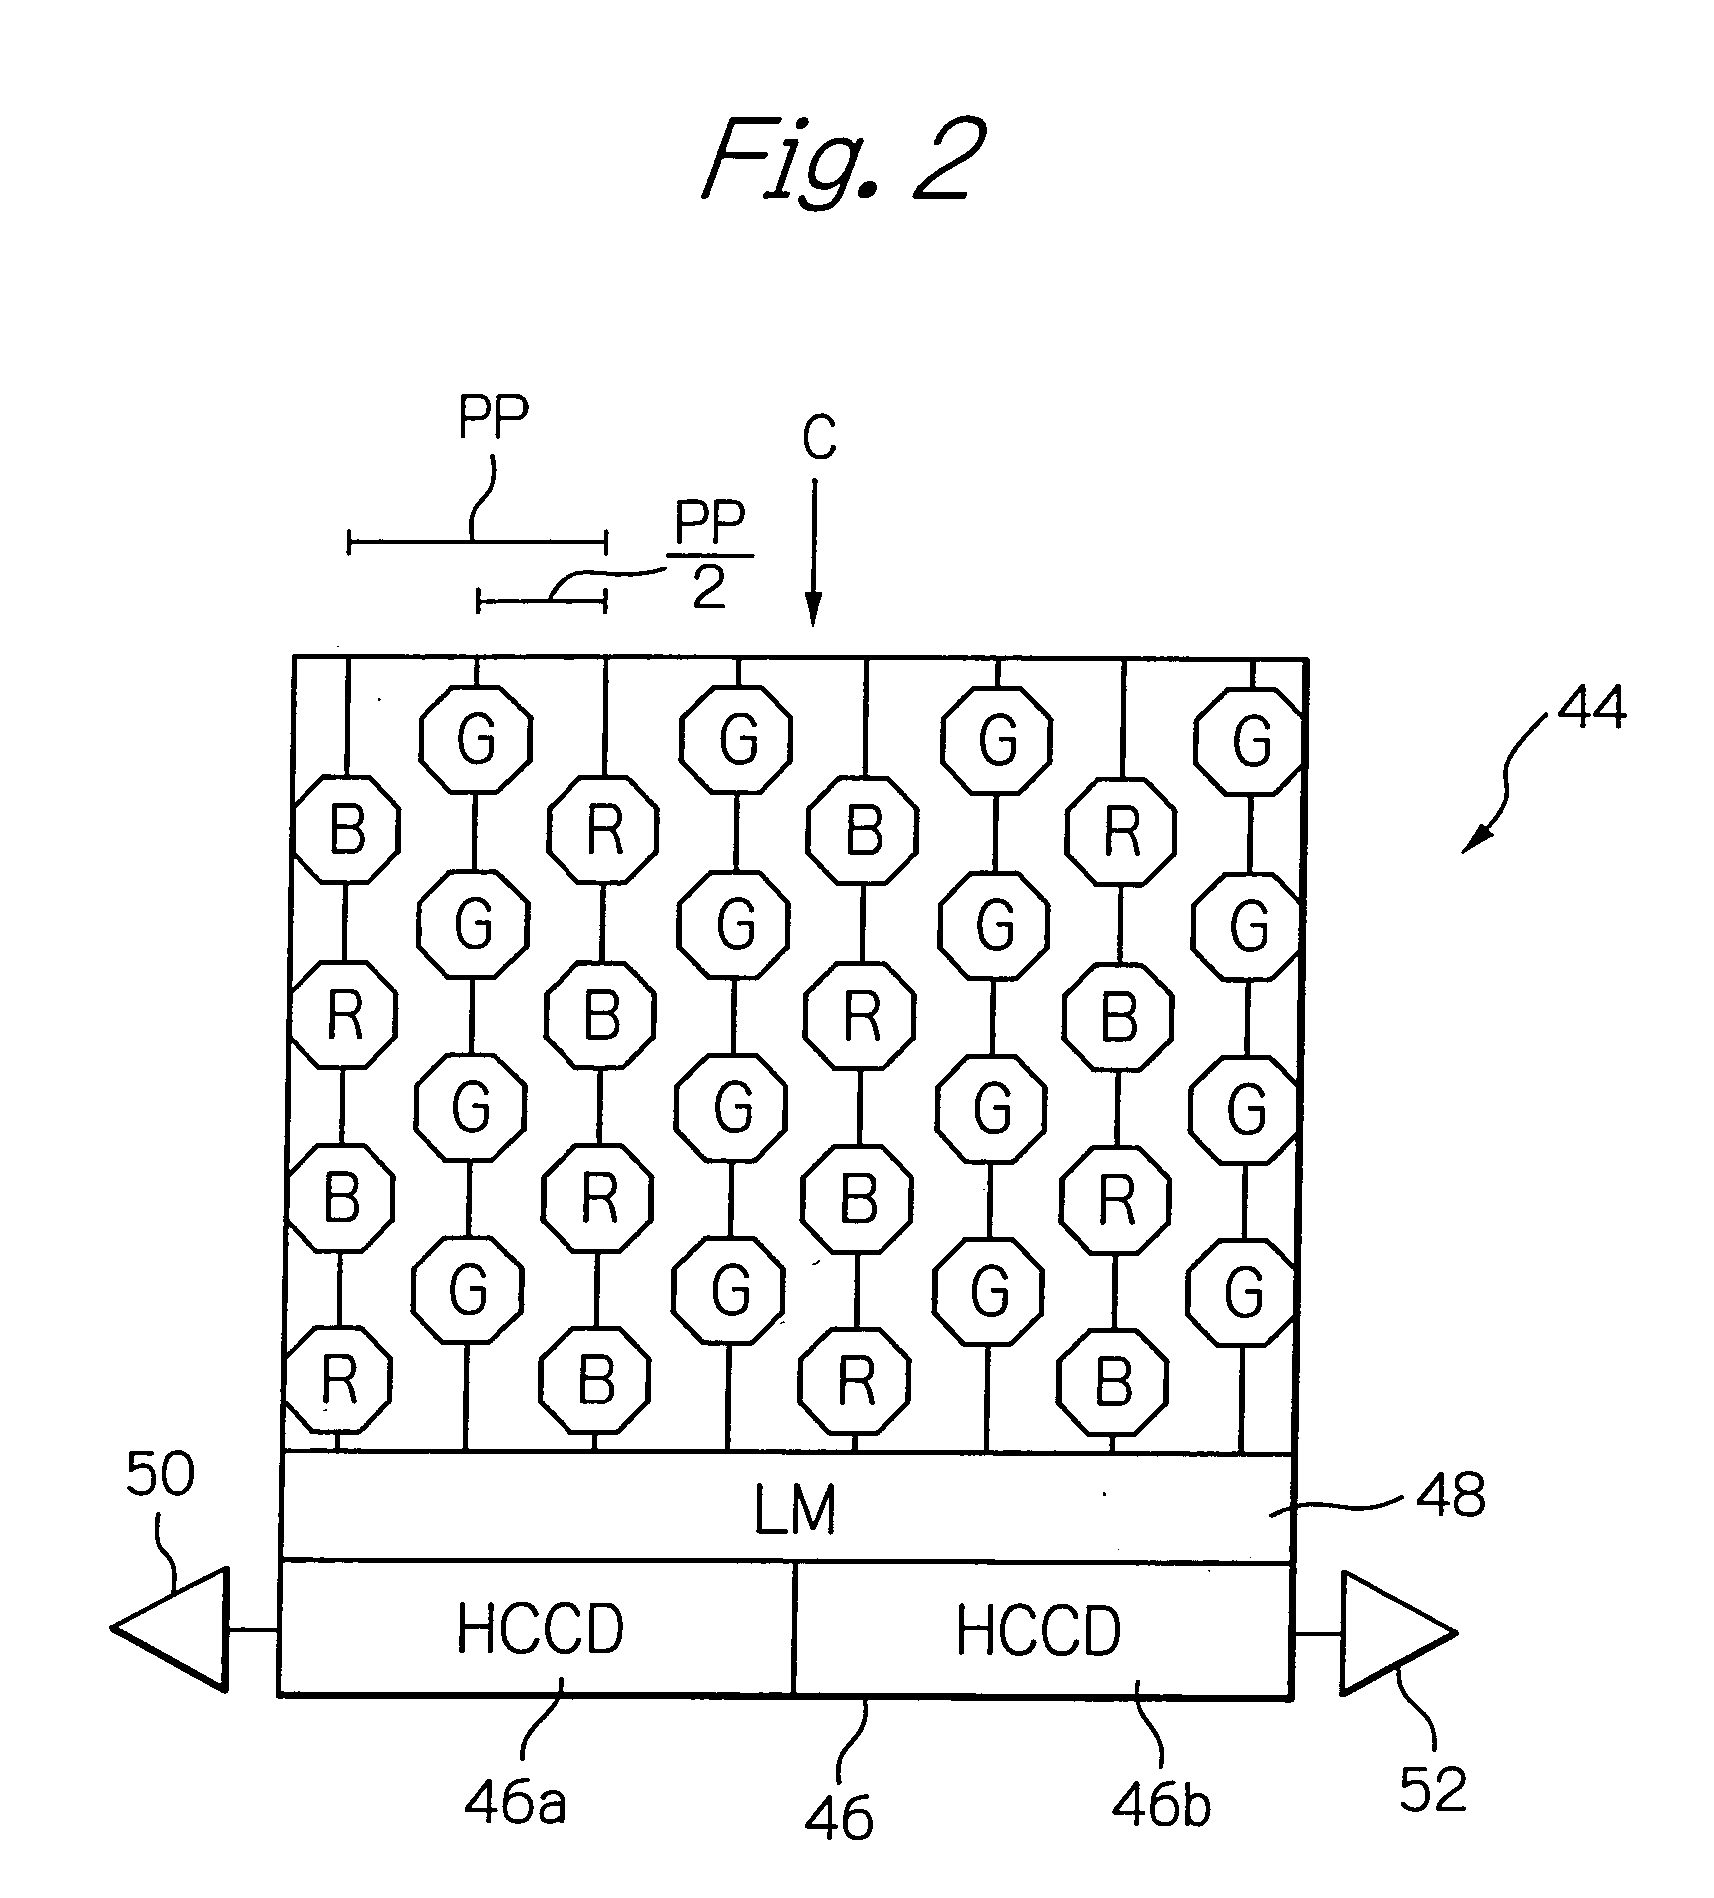 Imaging apparatus having output circuits selectably operative dependant upon usage and a method therefor